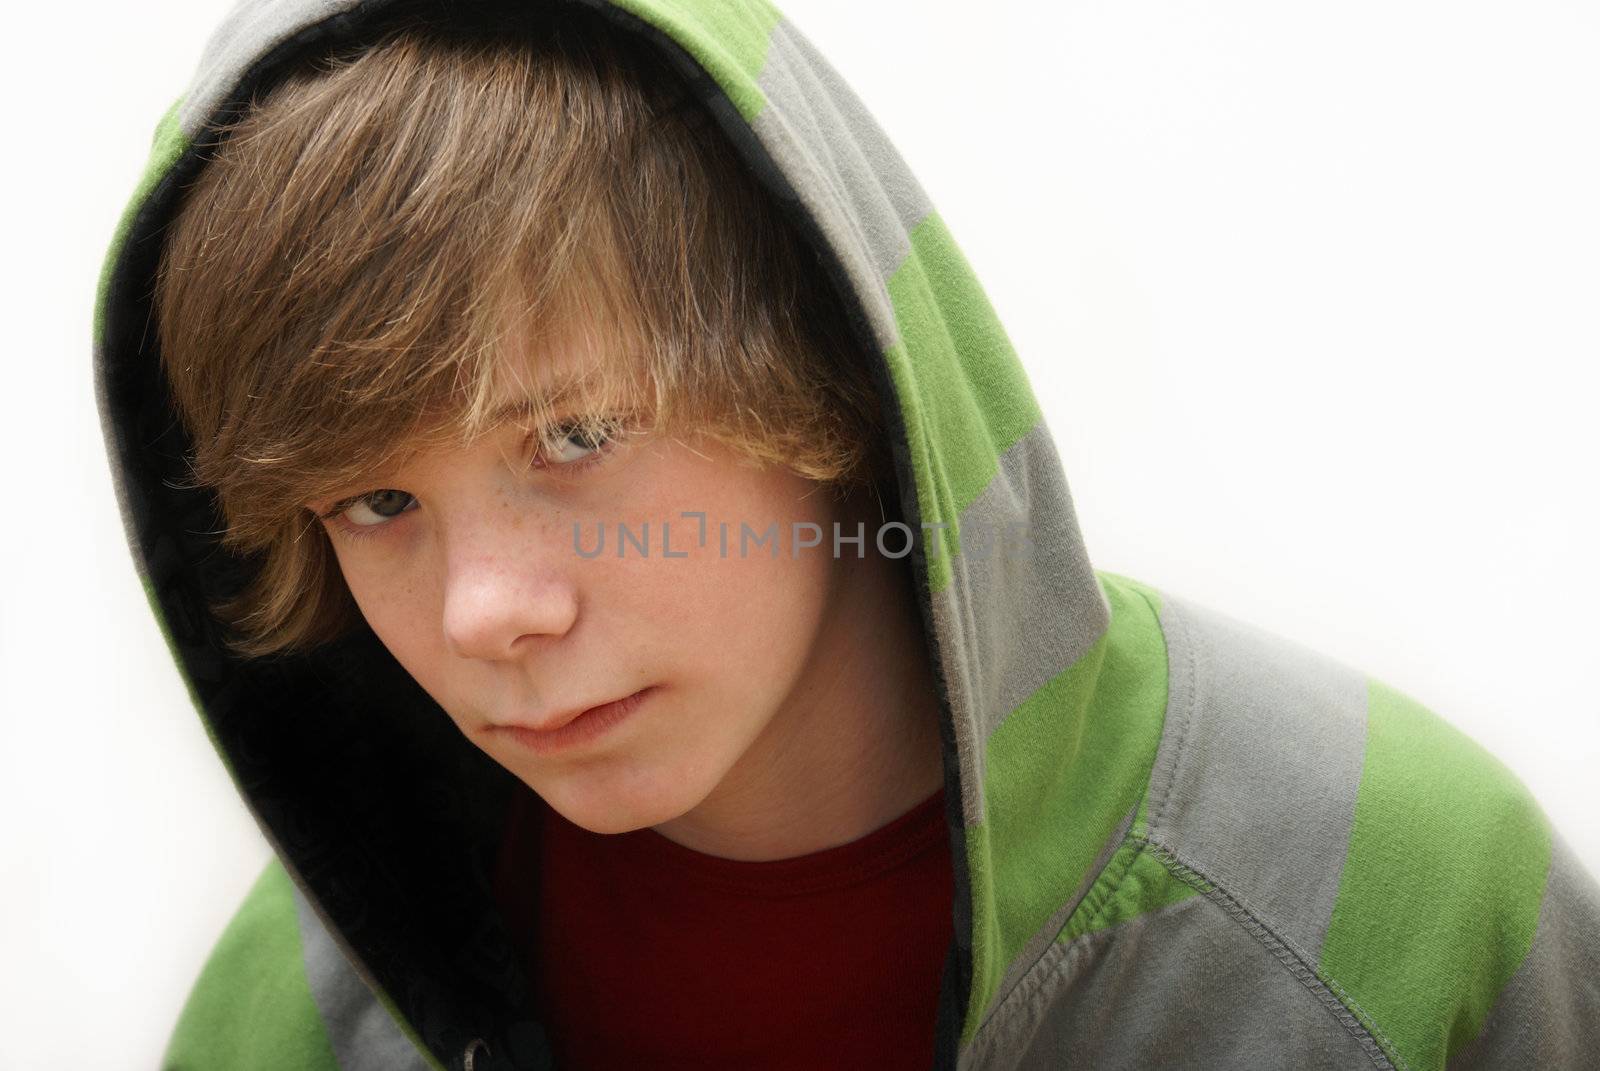 A young teenage boy wearing a green and gray hoodie.